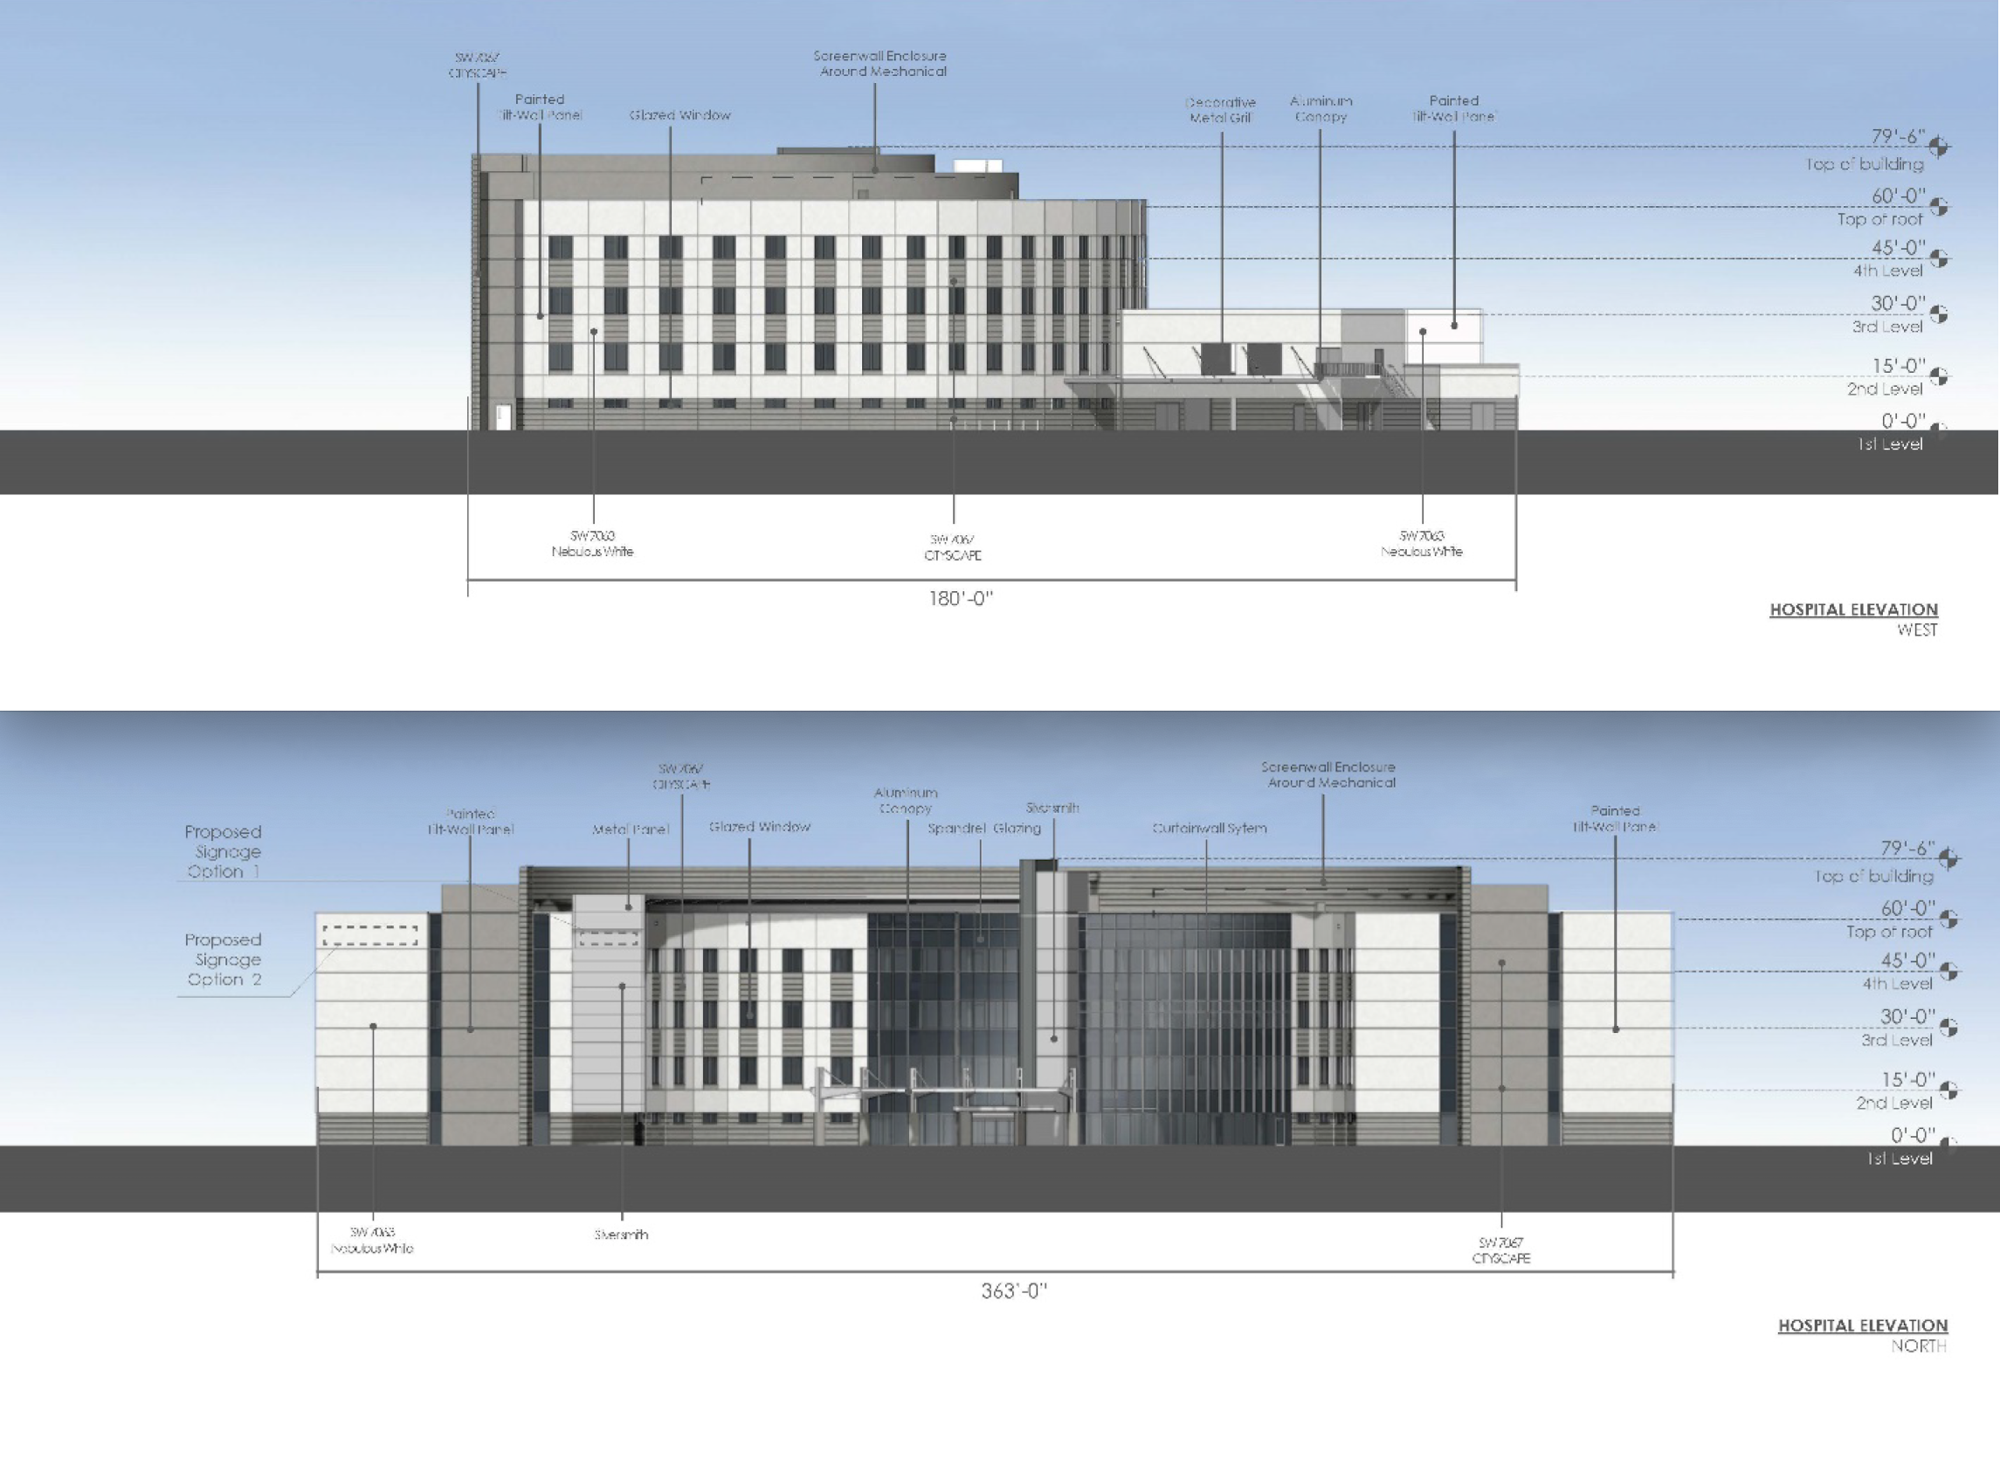 The west and north sides of the proposed hospital building. Images courtesy of the city of Palm Coast